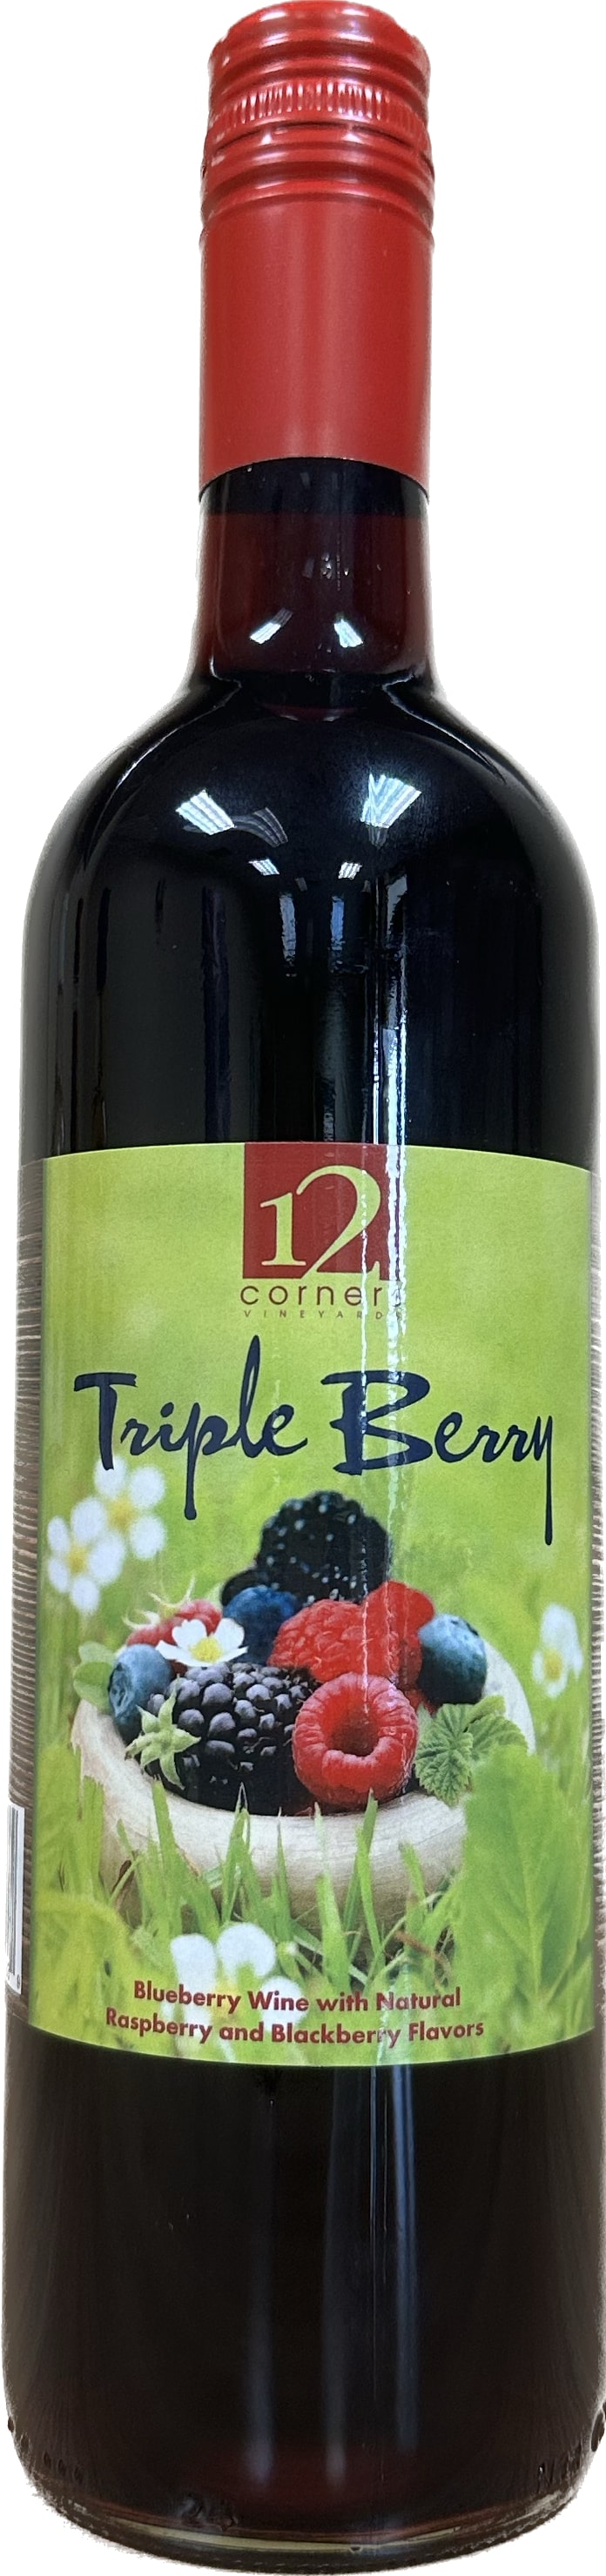 Product Image for Triple Berry